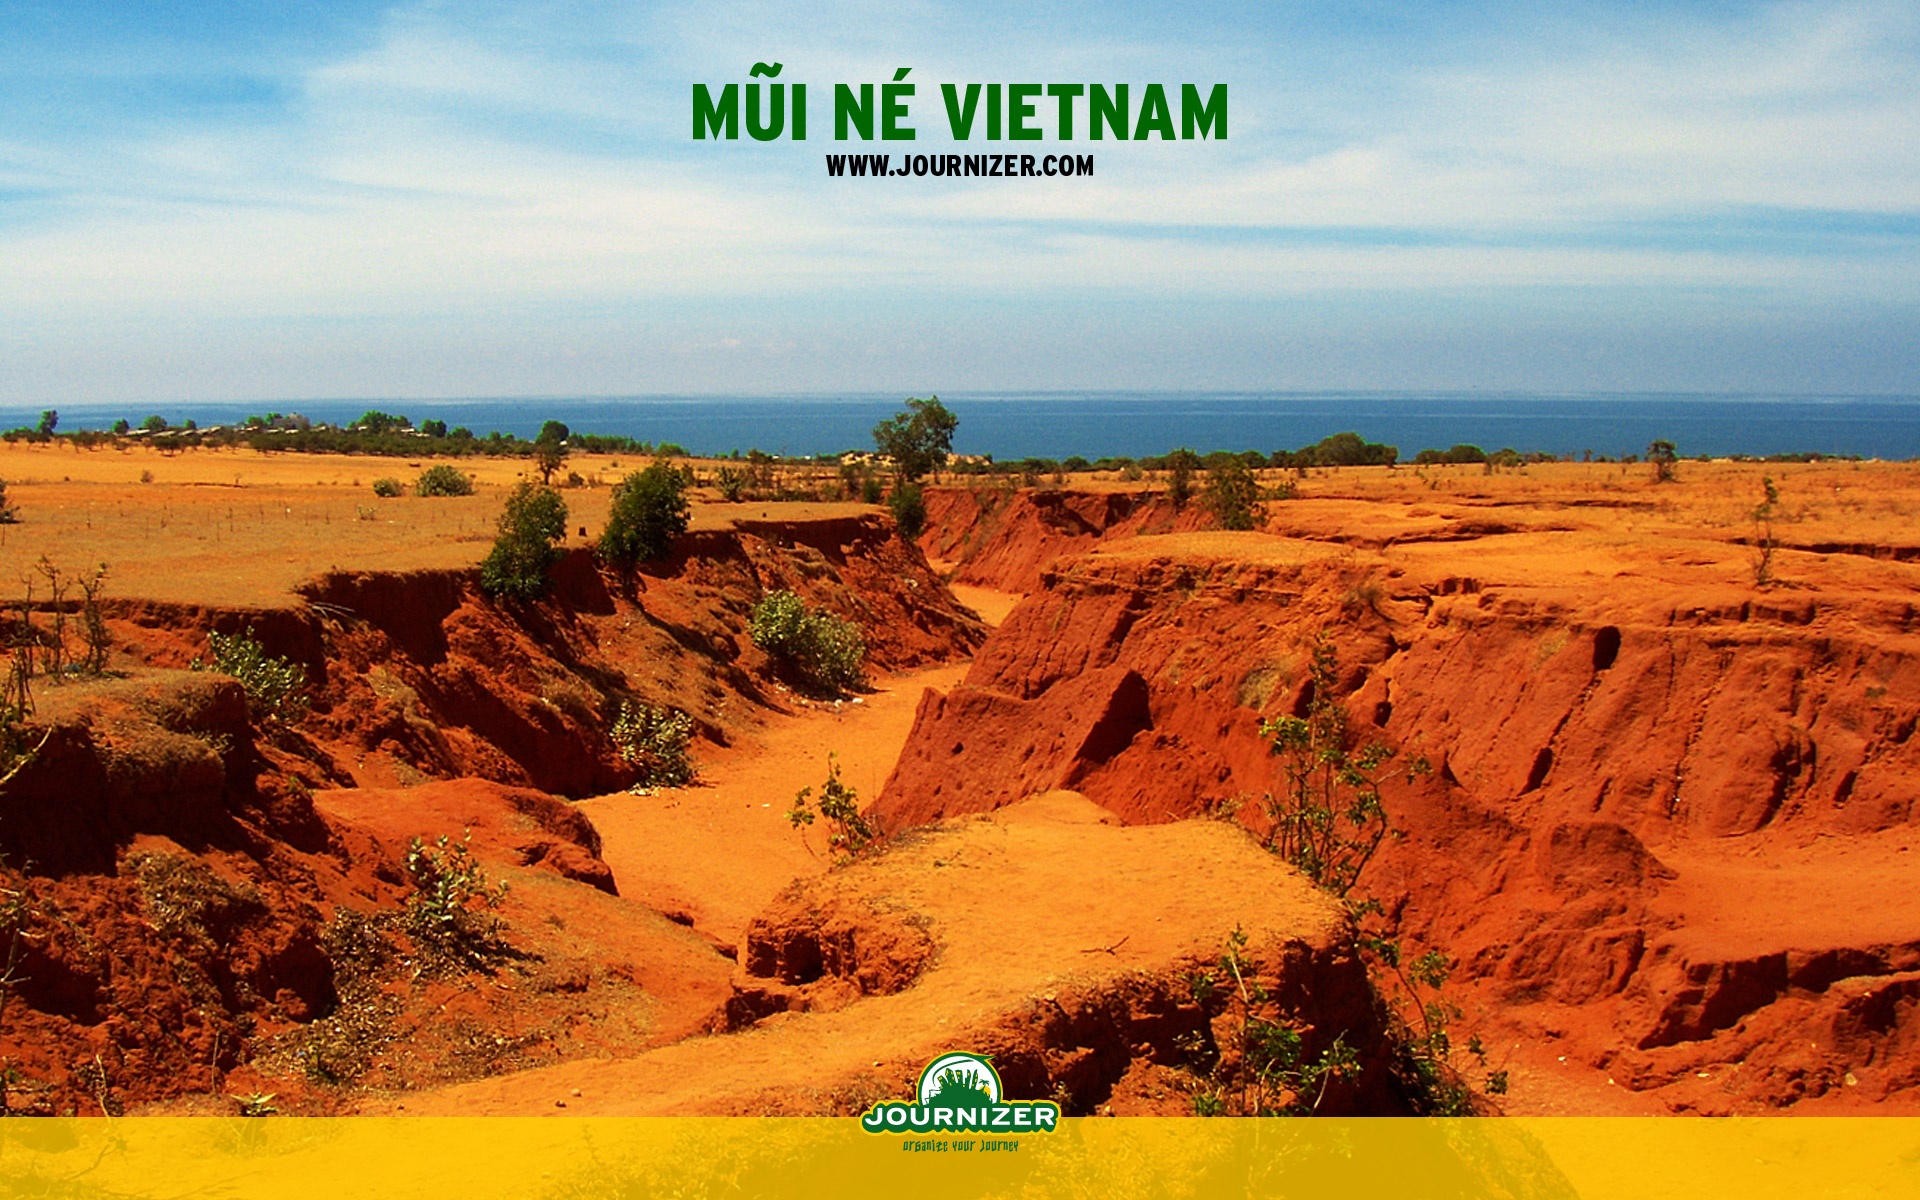 Mui Ne Vietnam wallpapers and images - wallpapers, pictures, photos